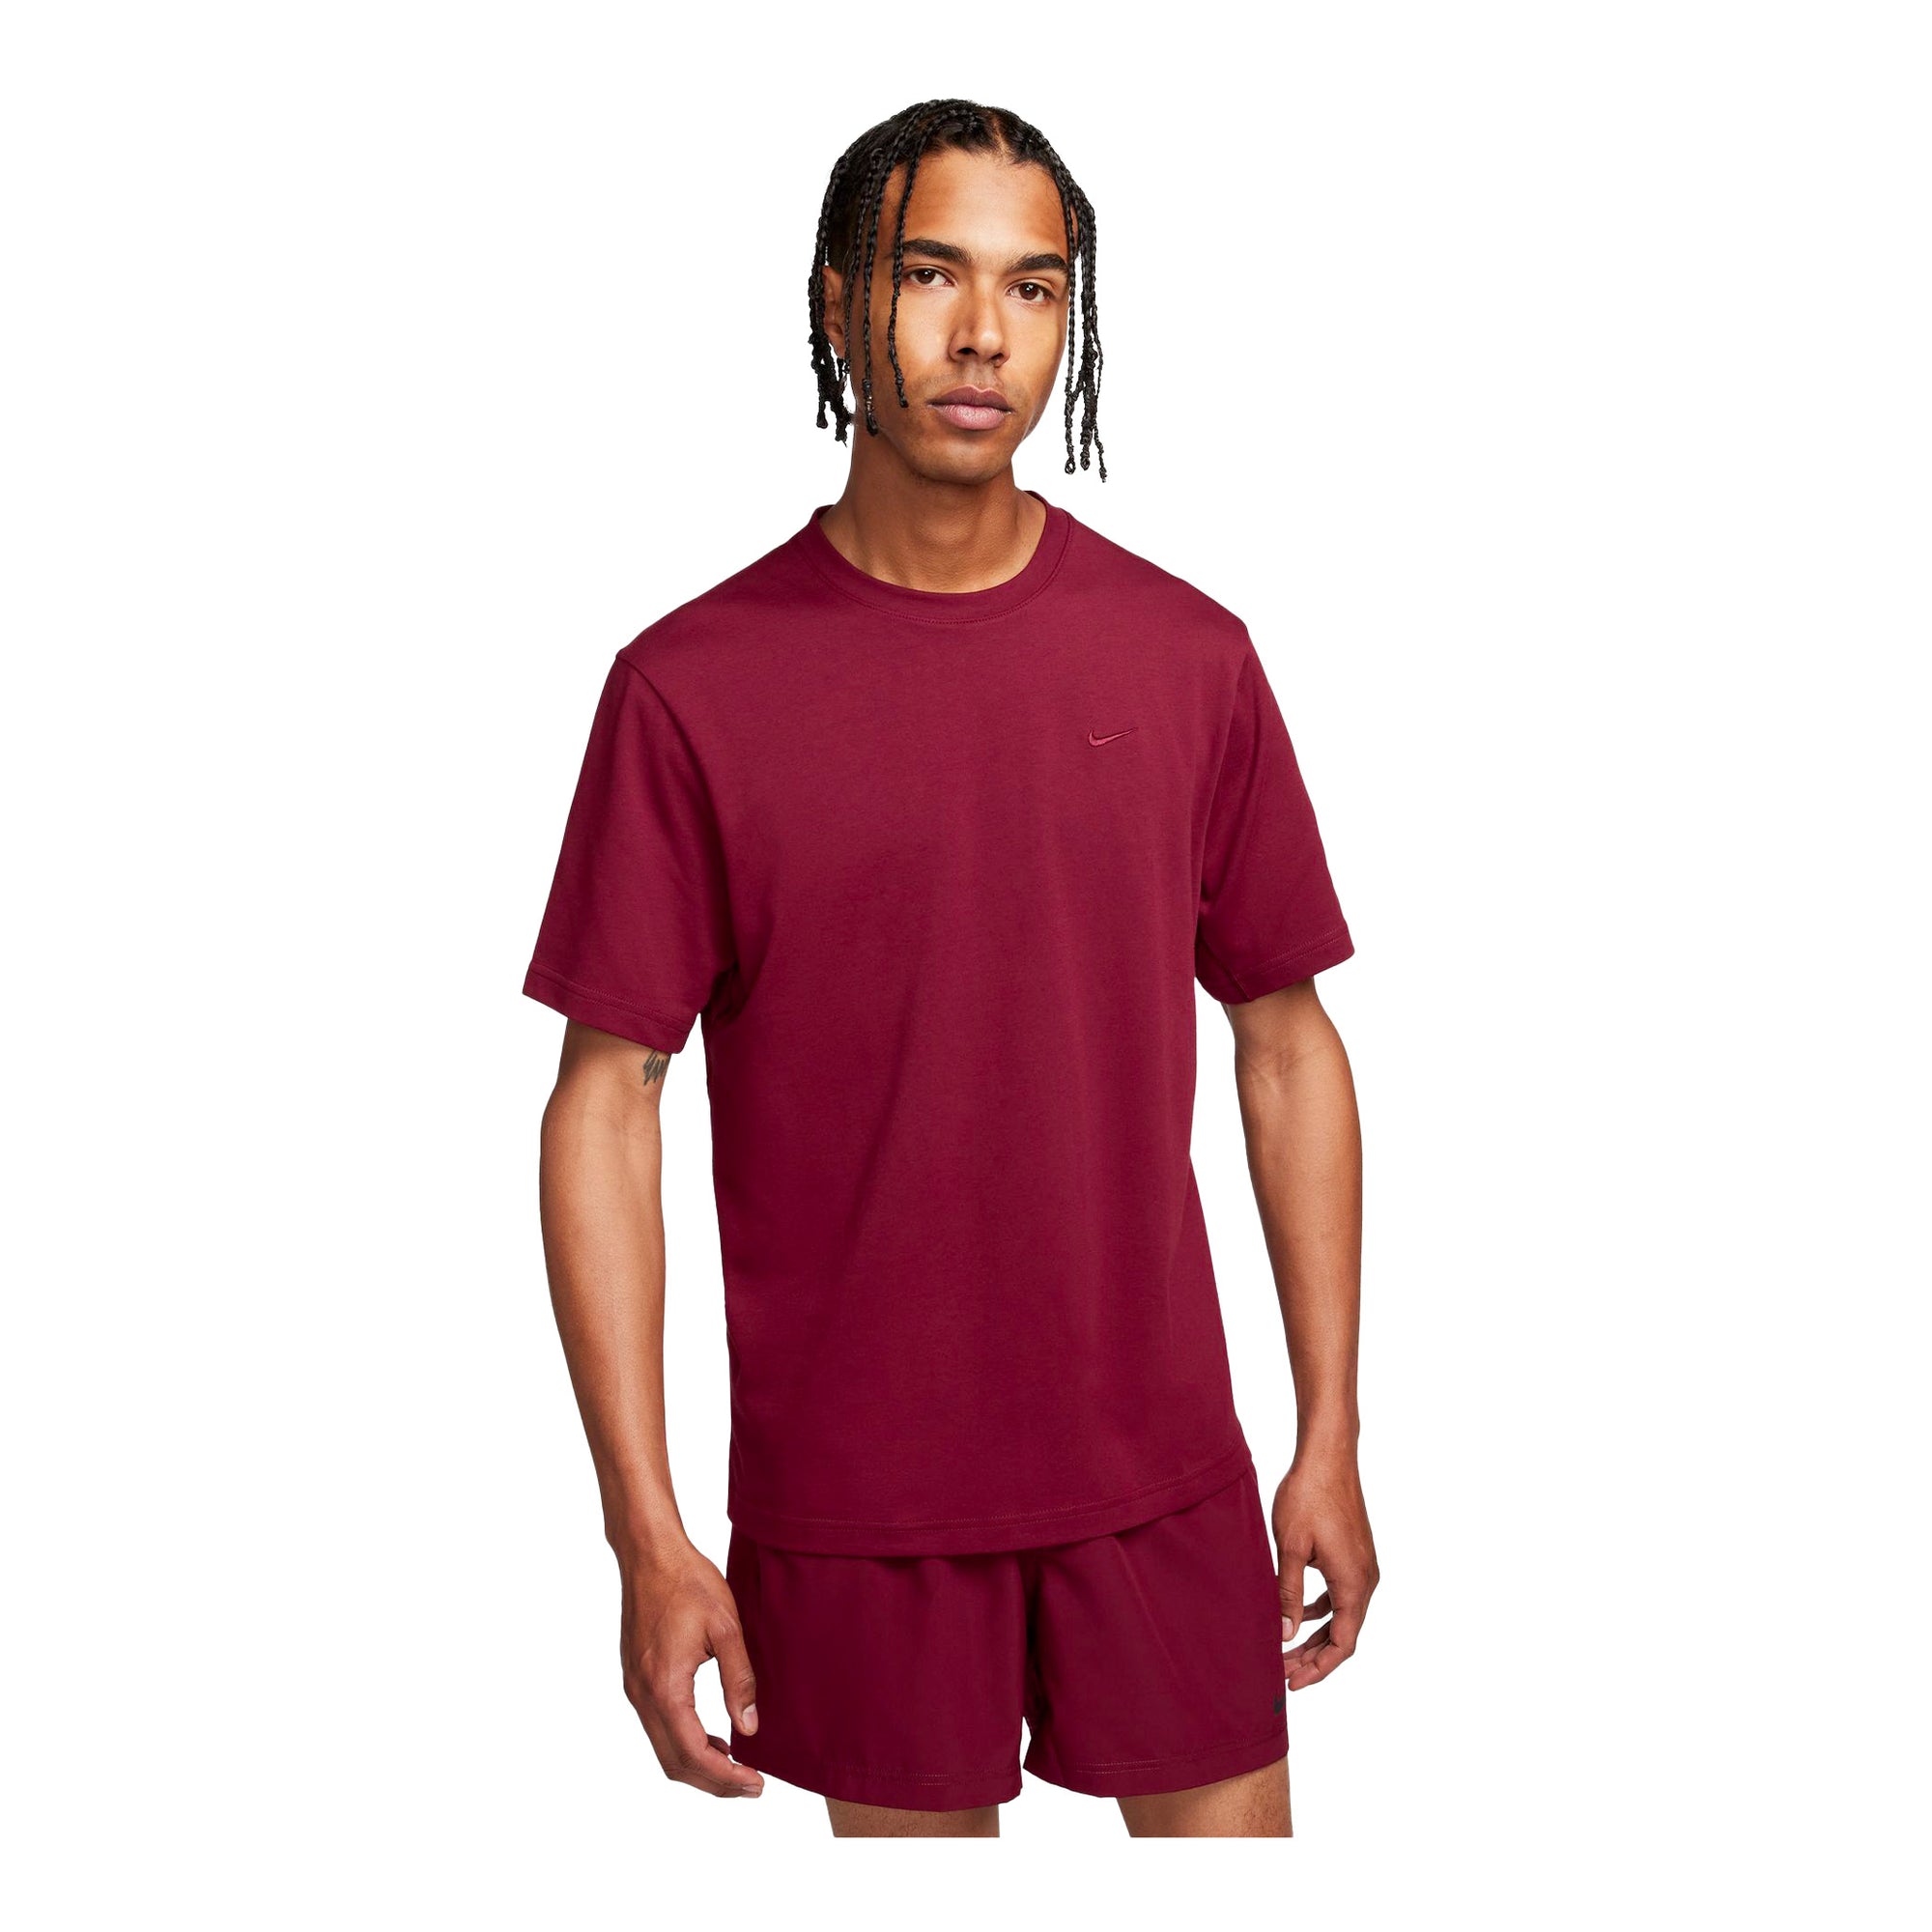 NIKE T-SHIRT DRI-FIT PRIMARY - HOMME